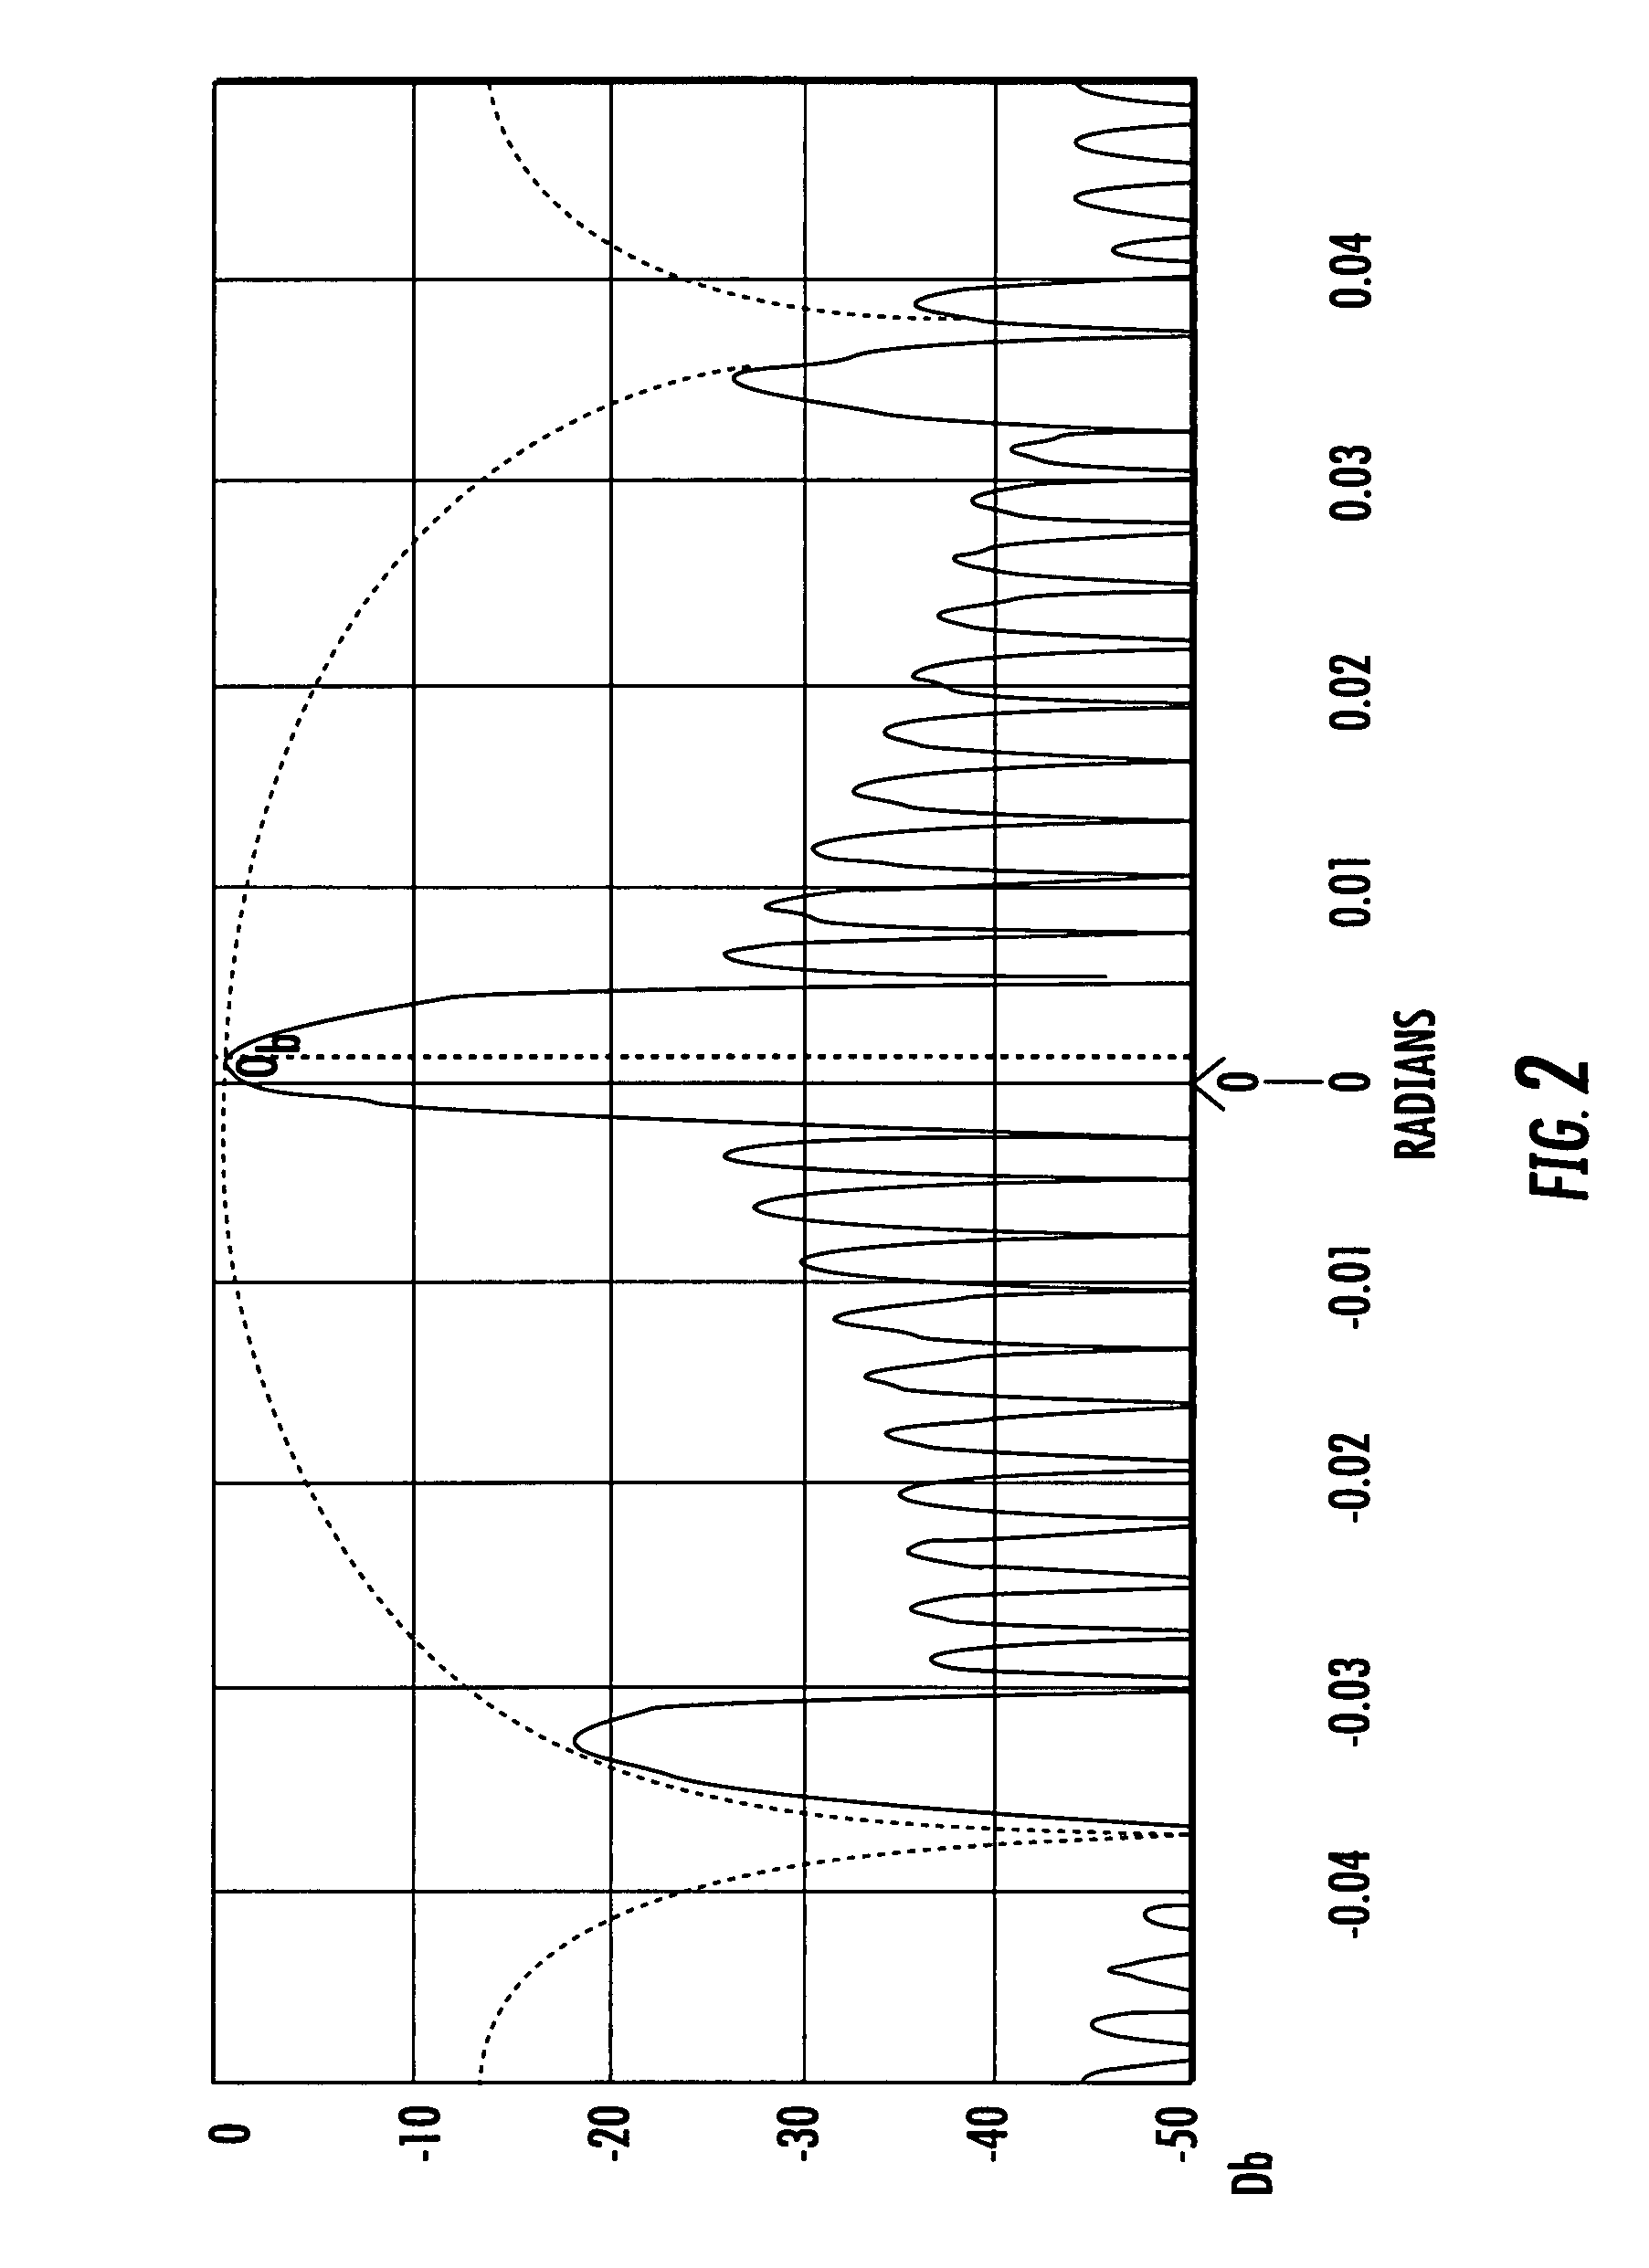 Low cost system and method that implements acousto-optic (AO) RF signal excitation